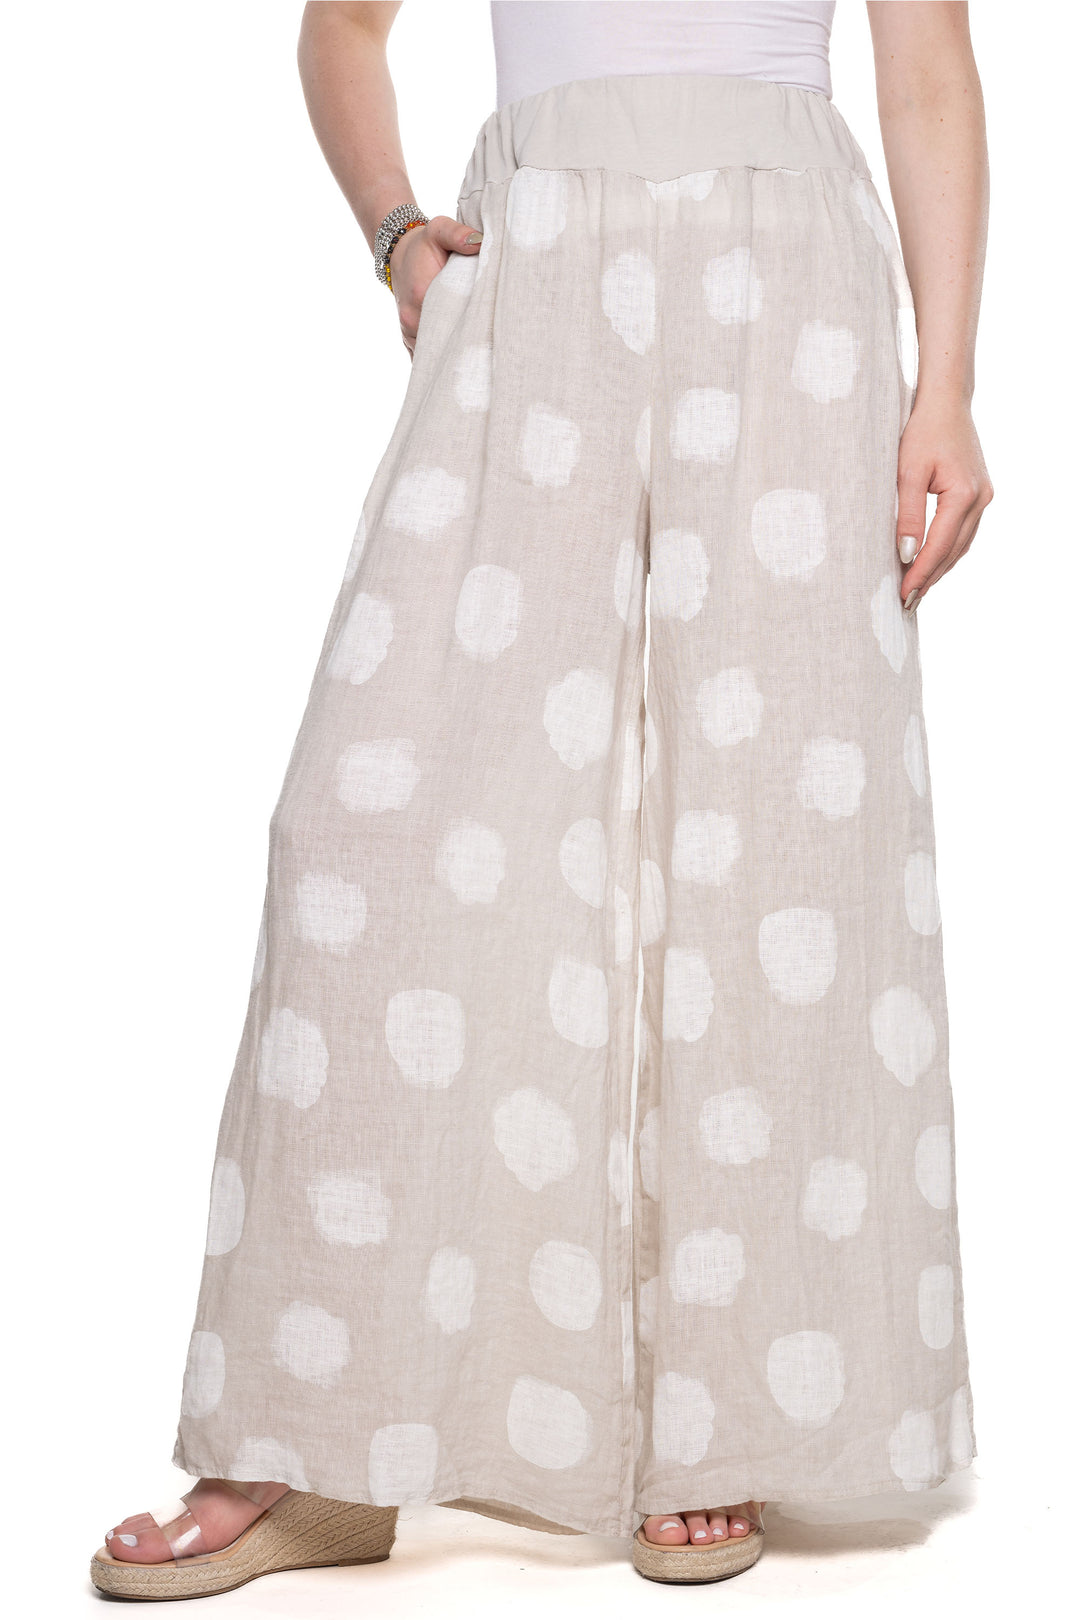 Etern Elle Summer 2024 These lightweight linen polka dot wide pant combines comfort and style with the wide leg, elastic waist and side pockets.